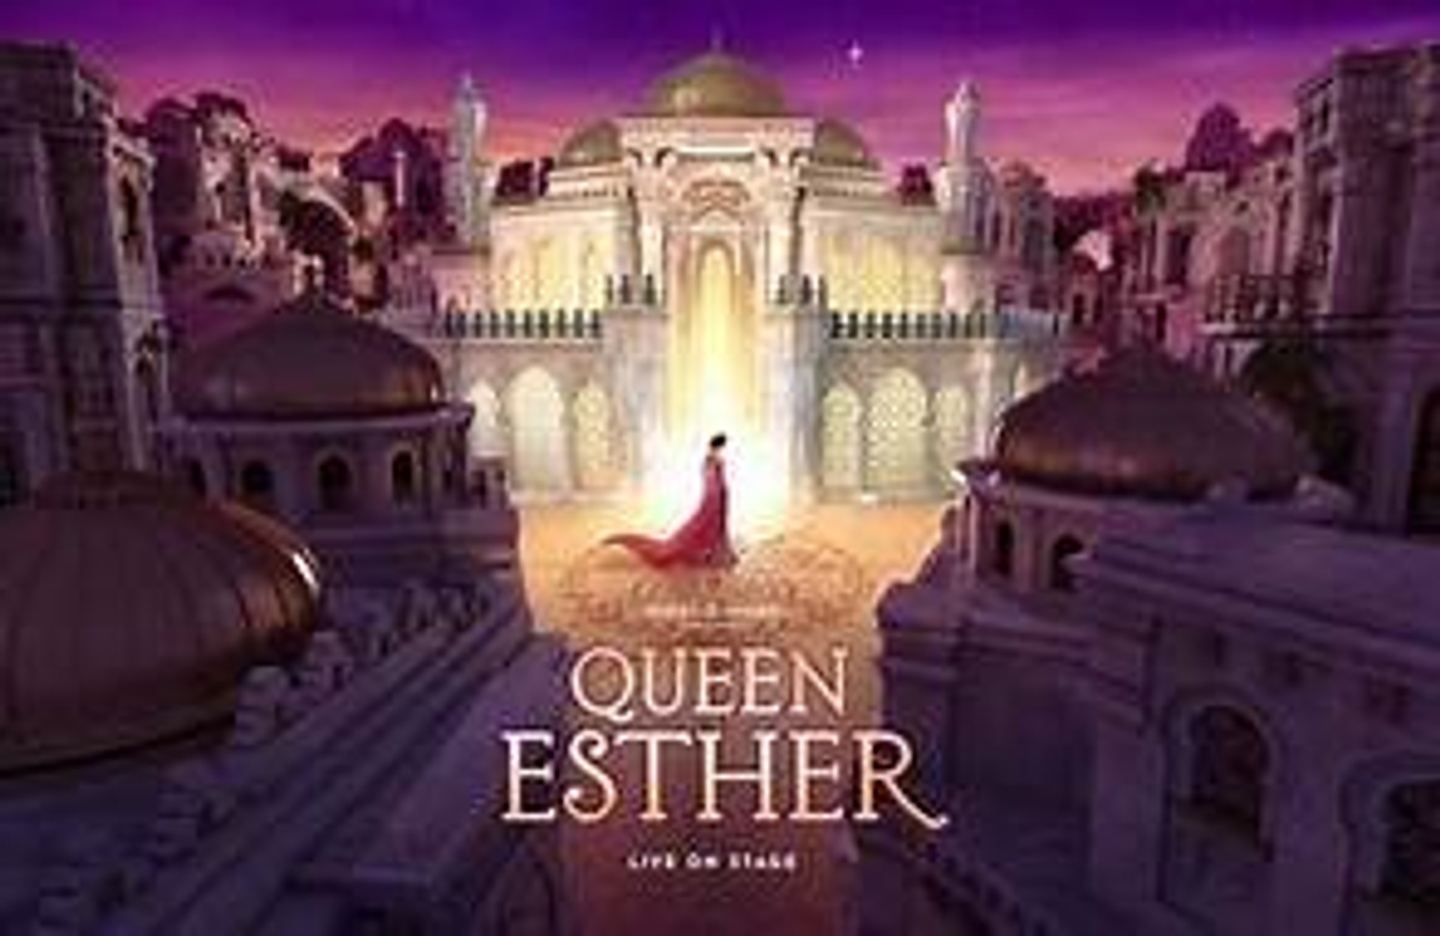 "Queen Esther"  Sight & Sound Theater and lunch at Shady Maple (copy)